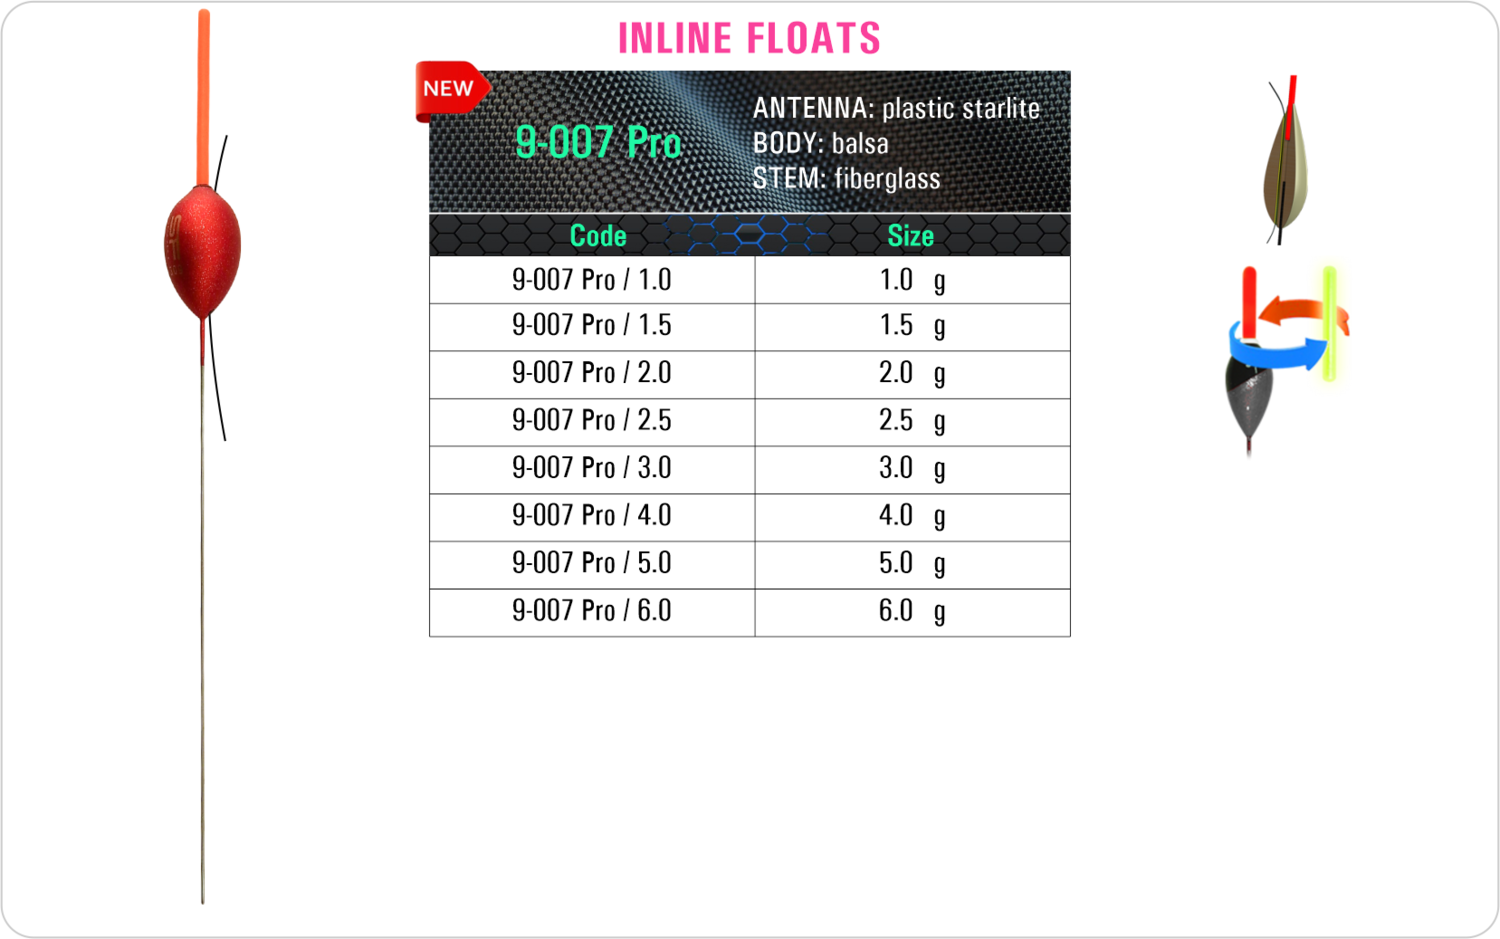 SF 9-007 Pro - Lake and river float model and table containing an additional information about this float with different codes, sizes, types of the body, the stem and the antenna of the float.